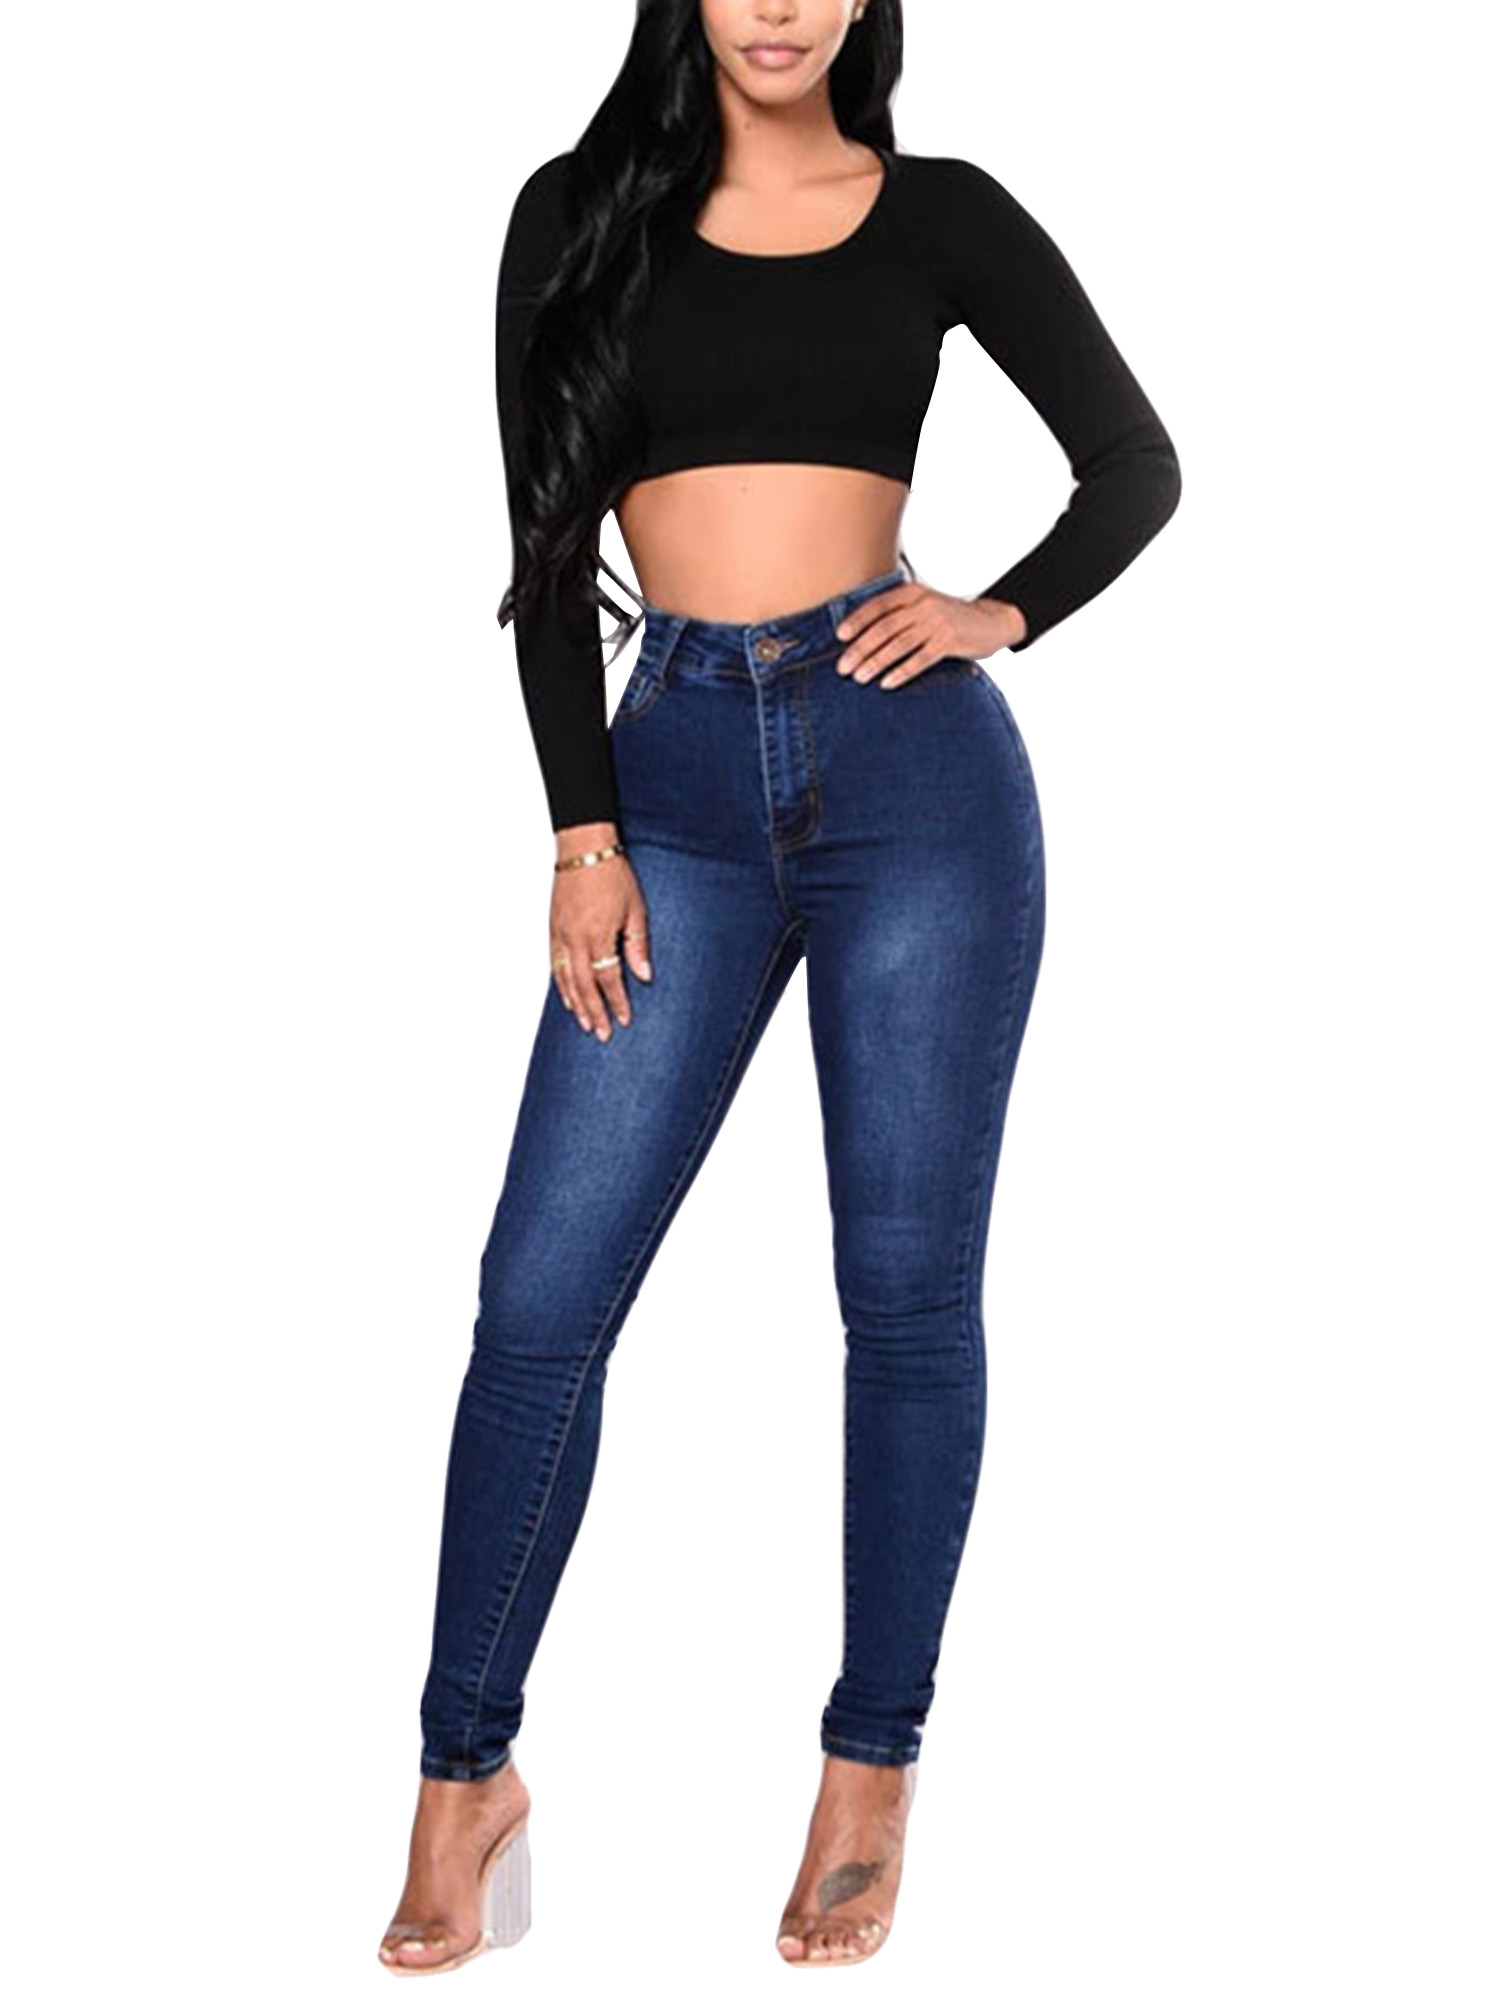 Women High Waist Jeans Pants Skinny Jeggings Pants Casual Bodycon Stretchy Pencil Pants Ladies Fashion Denim Pants Trousers - image 3 of 5